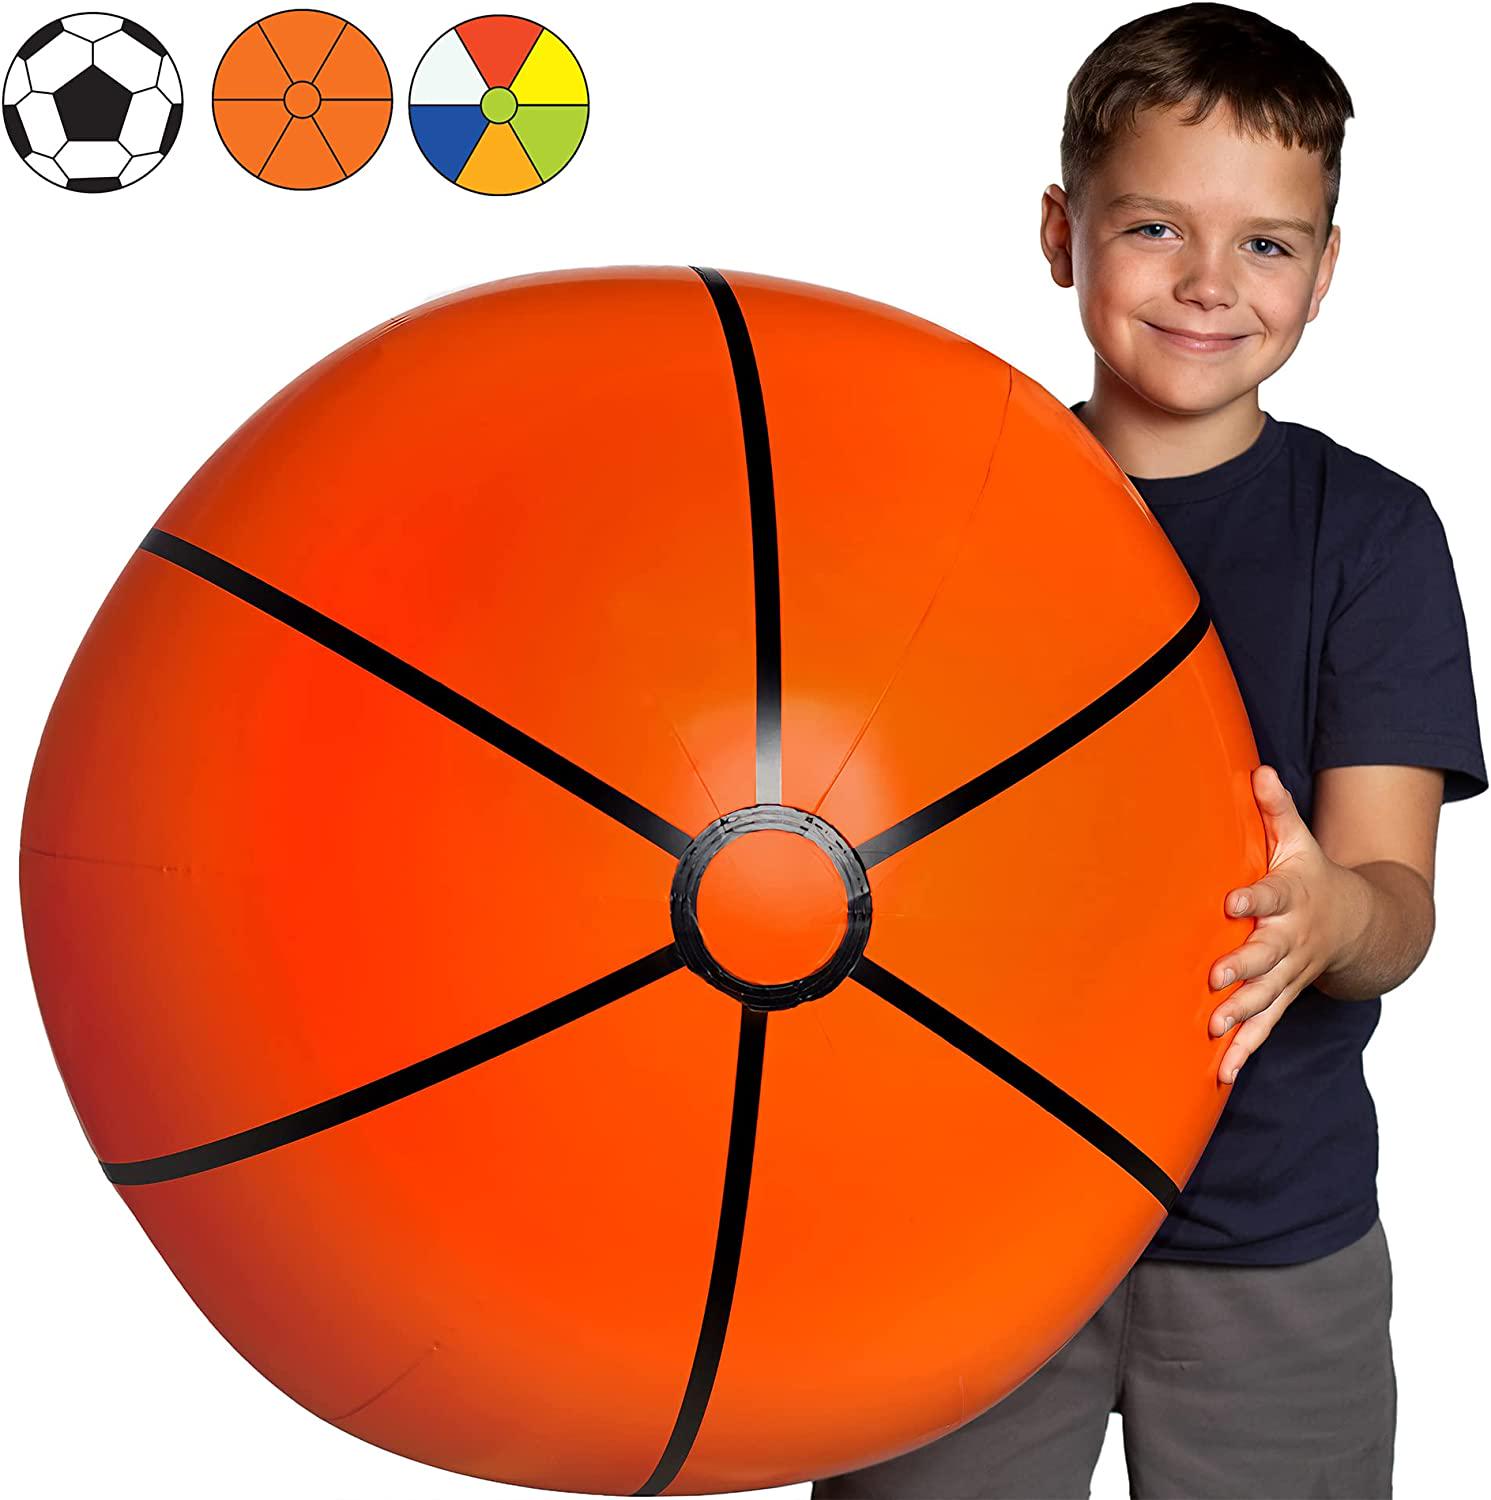 Refresh Sports, Large Beach Ball for Kids or Adults - Easy to Inflate and Durable Material to Last for Years of Fun - Comes in 3 Colors - Great Gift Idea for Boys and Girls All Ages - Also Best Pool Party Decoration Toy